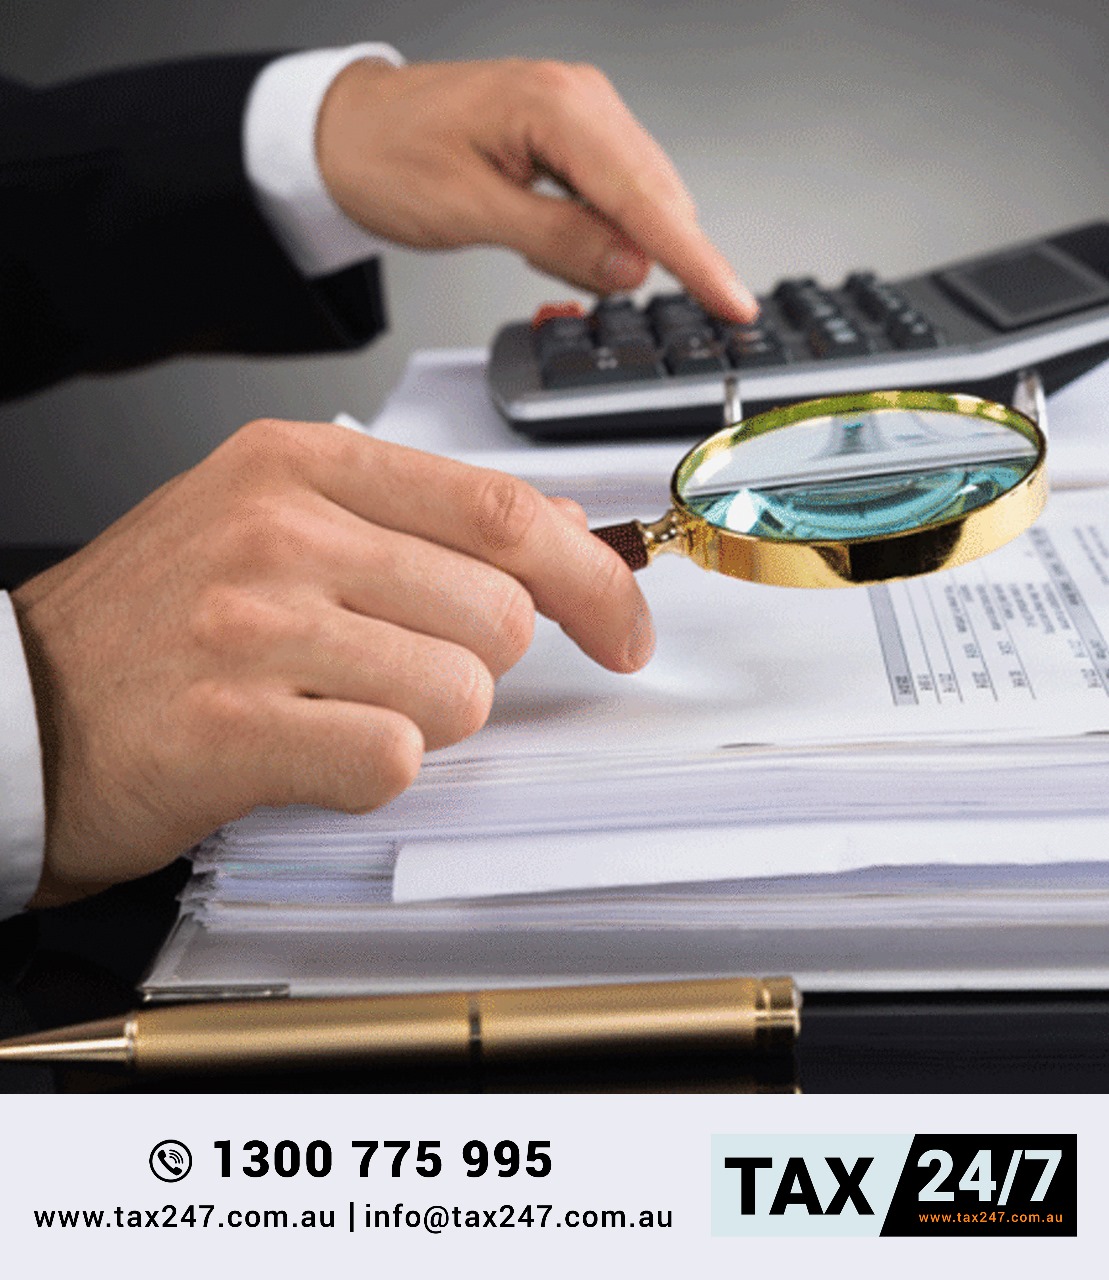 Are you tired of complicated tax calculations and paper filing your lodging tax return?